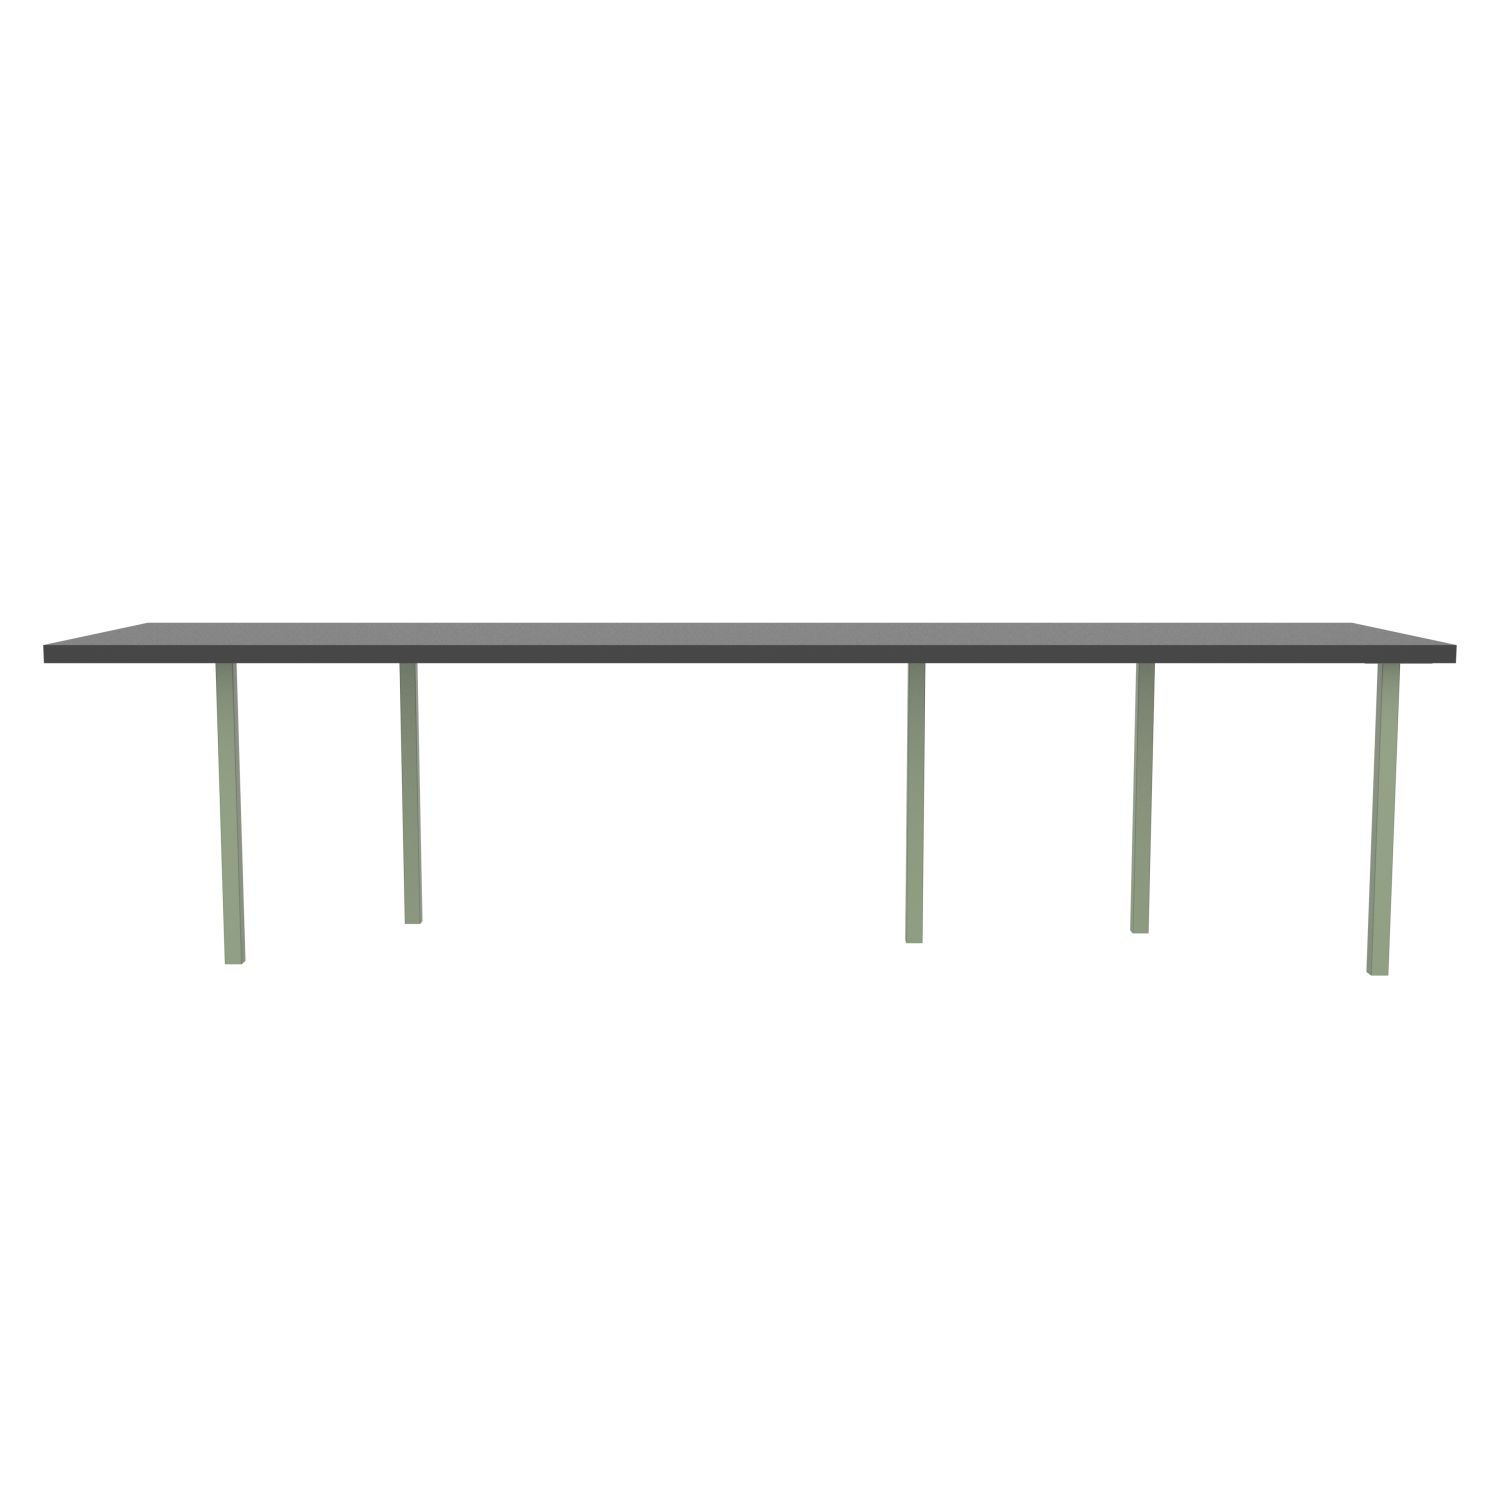 lensvelt bbrand table five fixed heigt 80x310 hpl black 50 mm price level 1 green ral6021